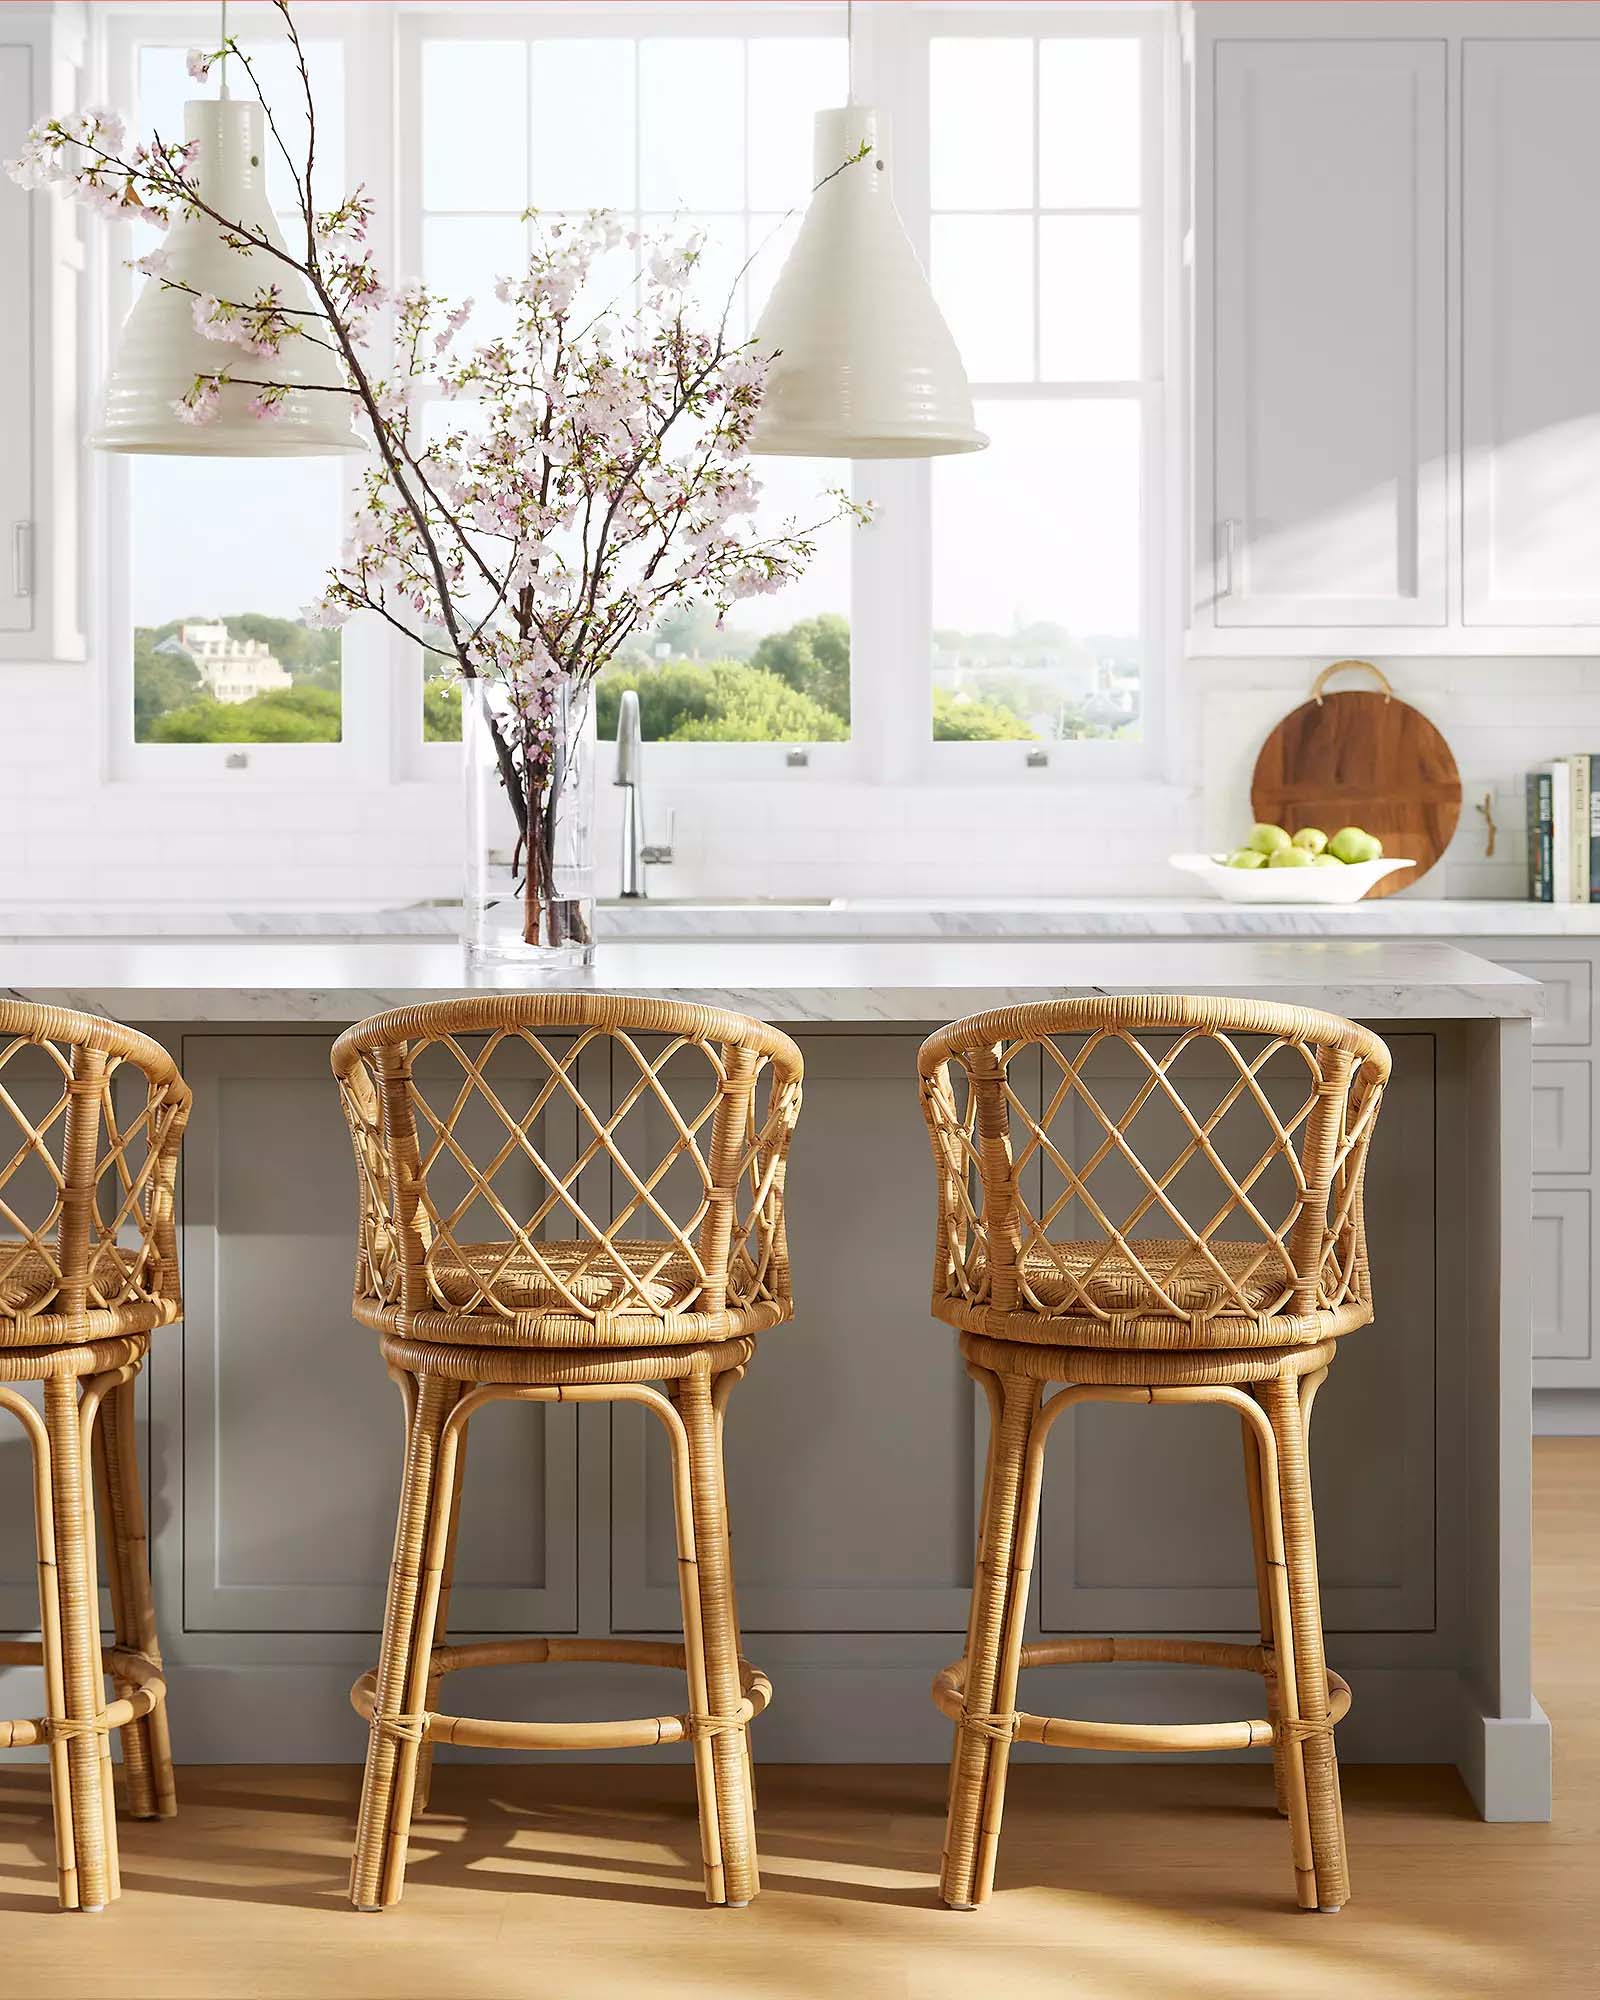 natural rattan swivel chairs at a gray kitchen island.